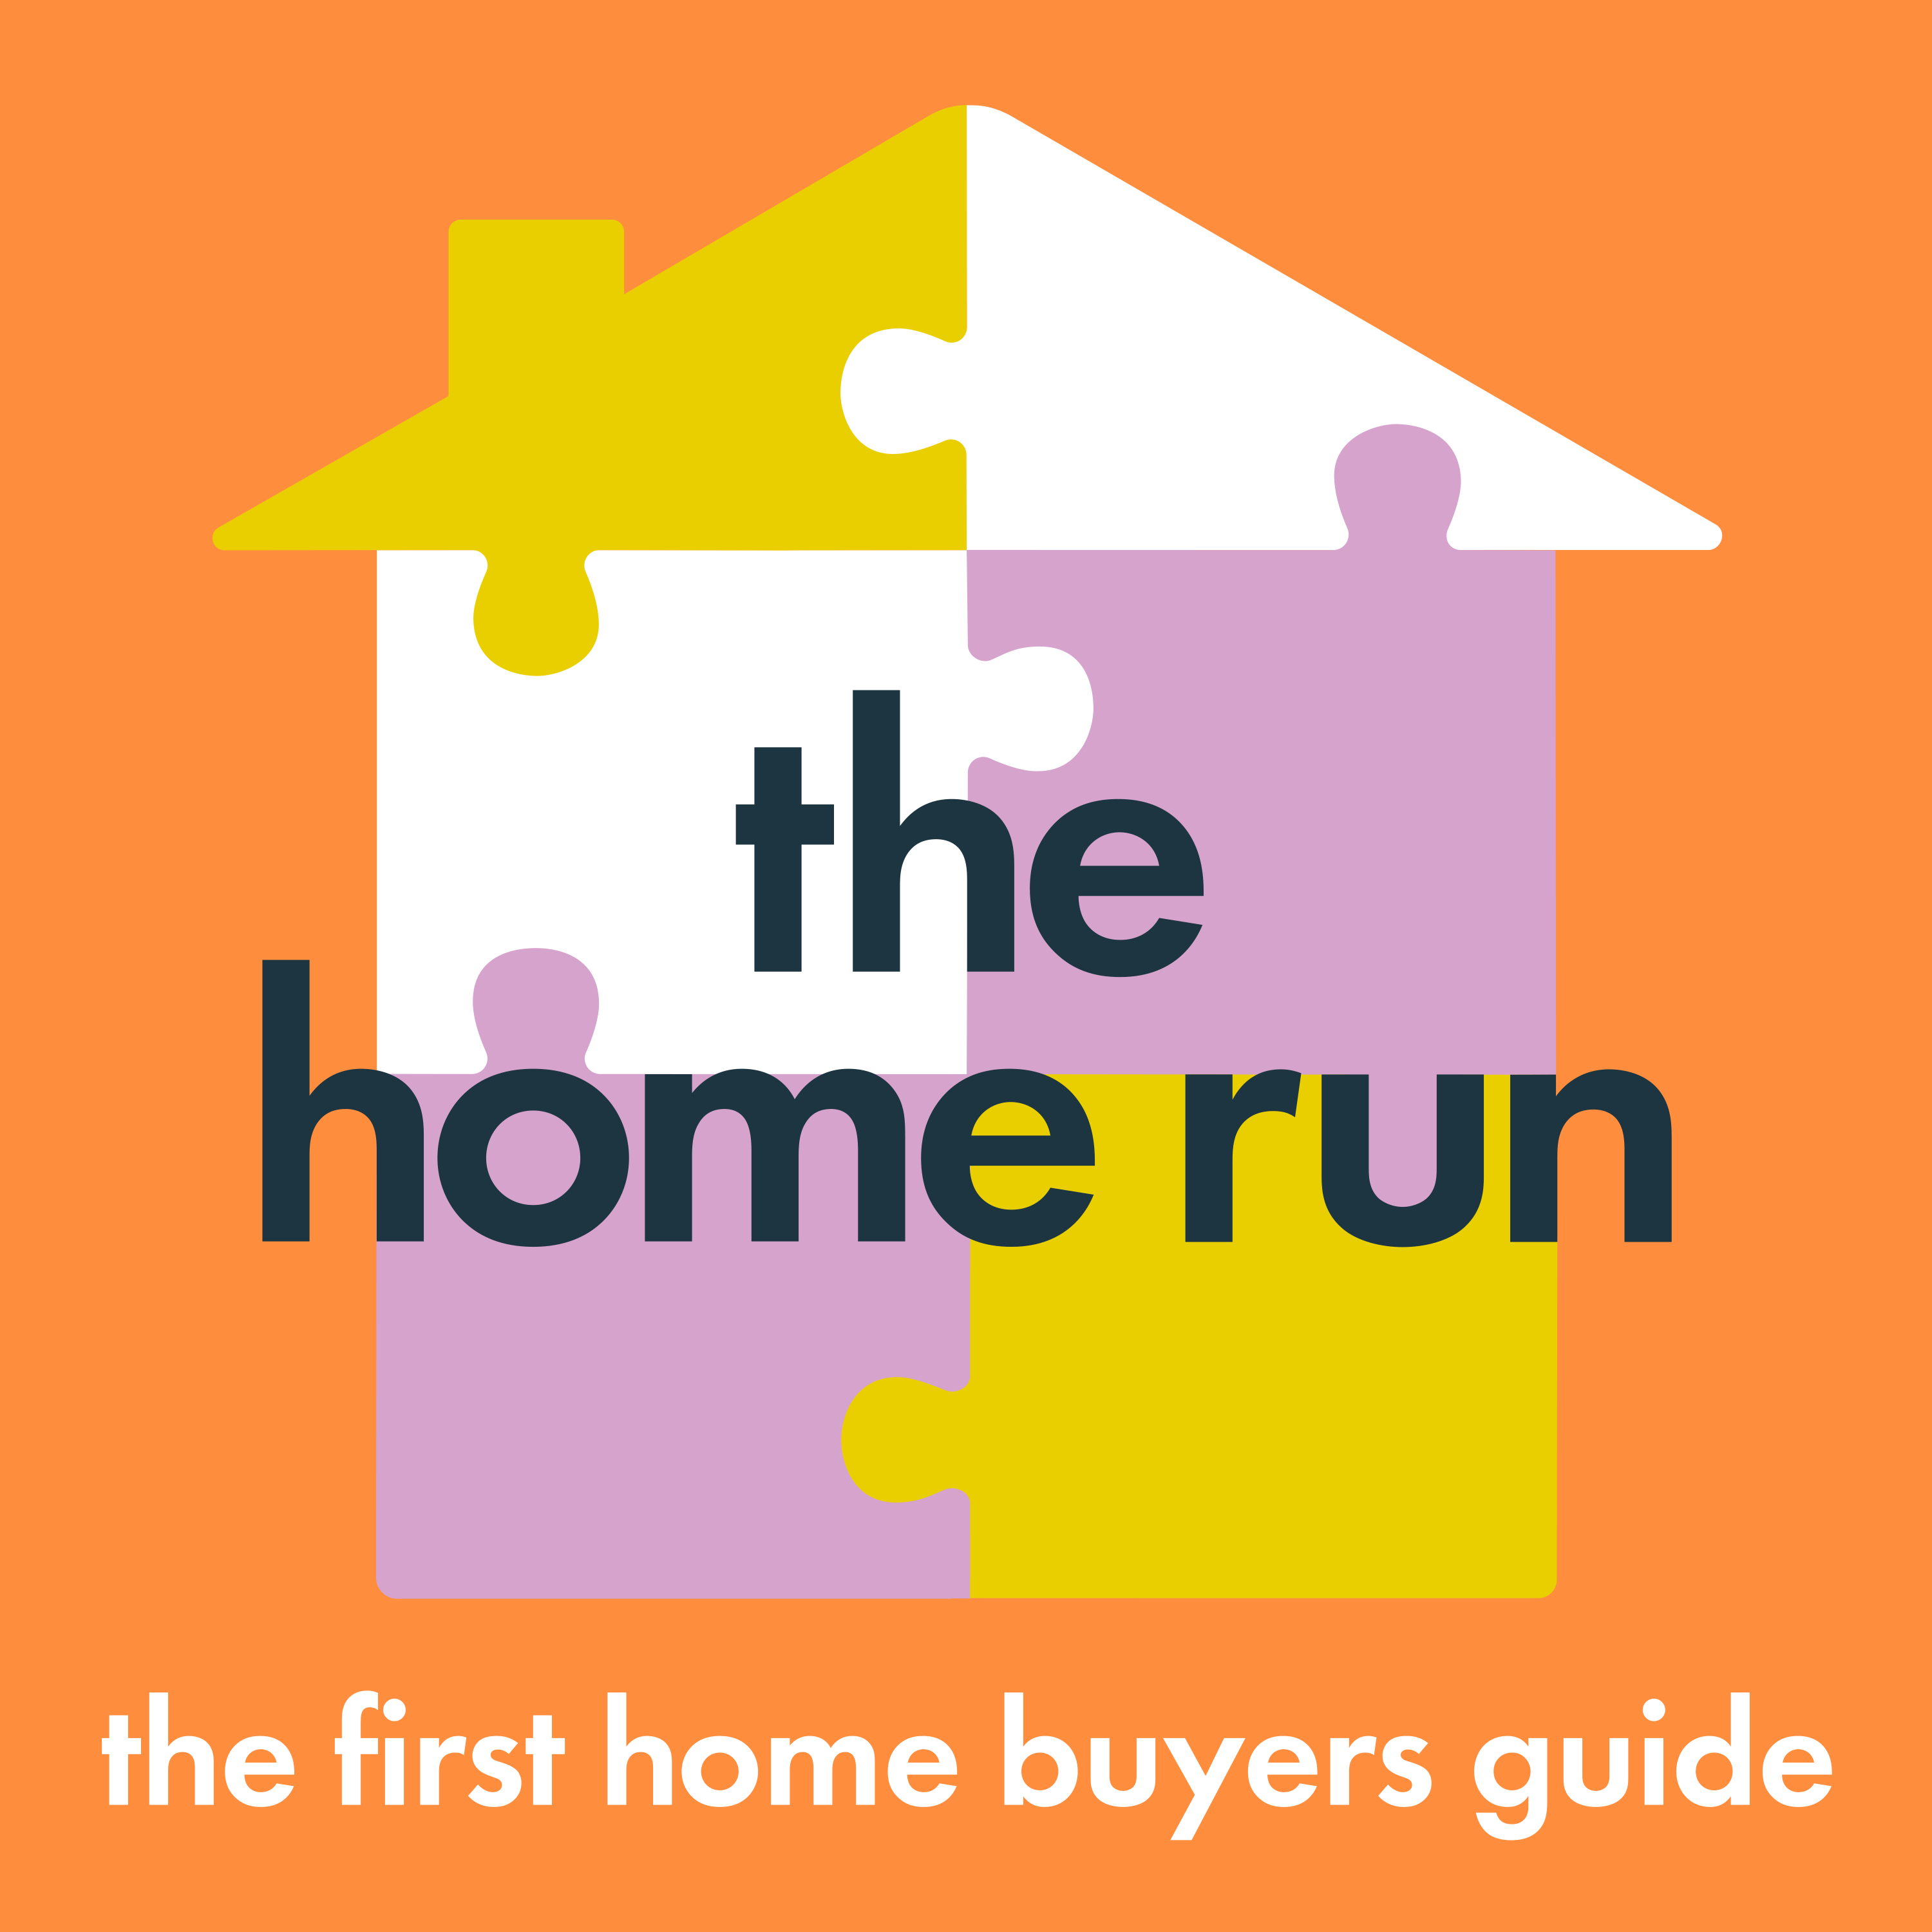 The trends affecting first-home buyers